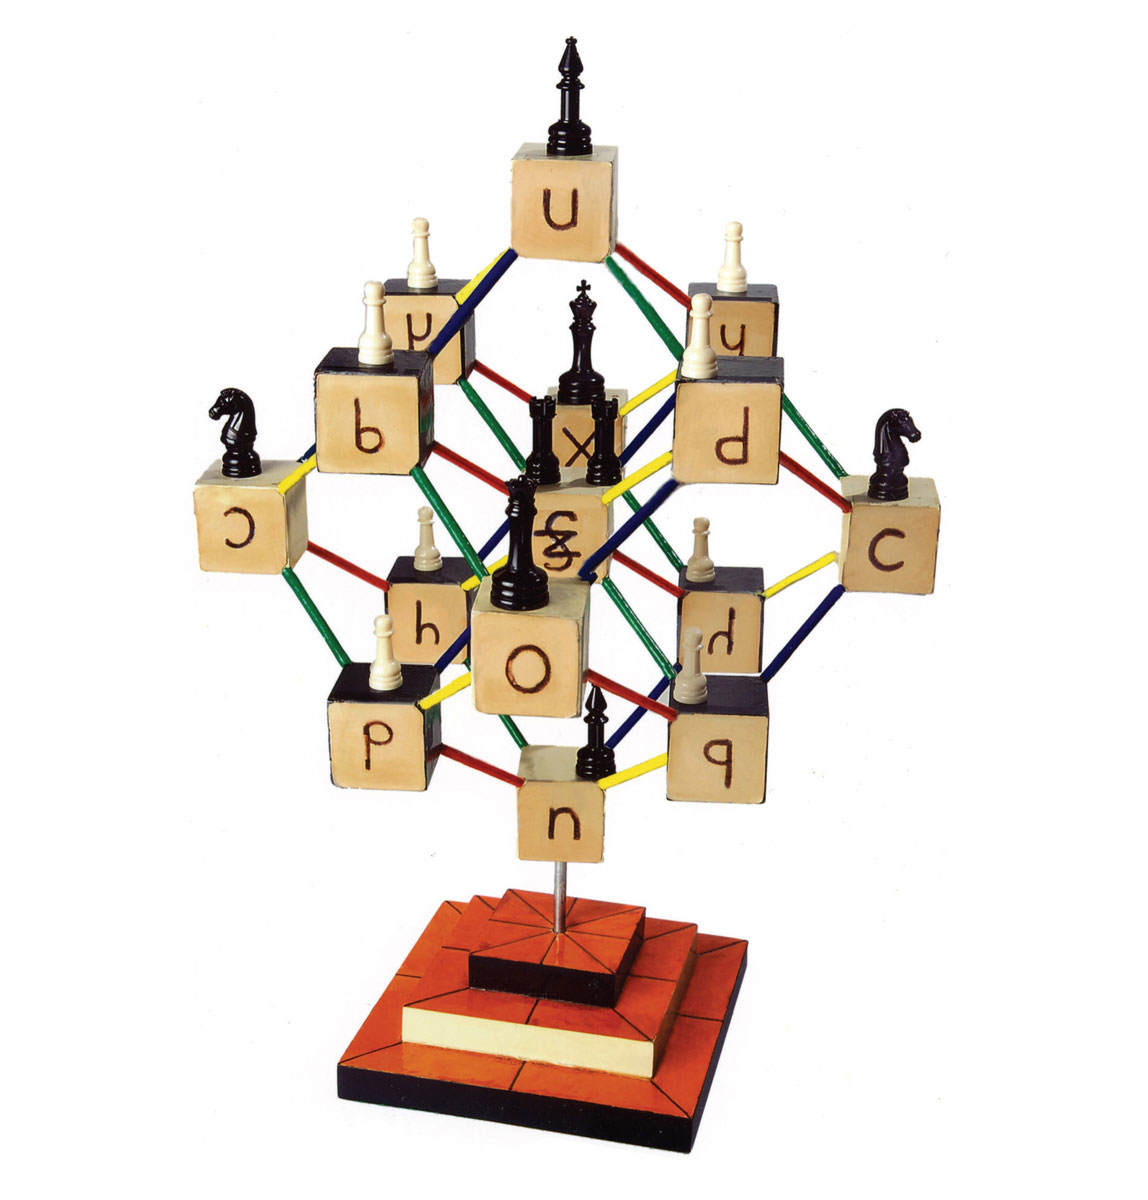 A photograph of Zellweger‘s “Logical Garnet,” a wooden model made of alphabet blocks and chess pieces in which the symmetries of the full three-dimensional figure behind the Logic Alphabet can be seen. 